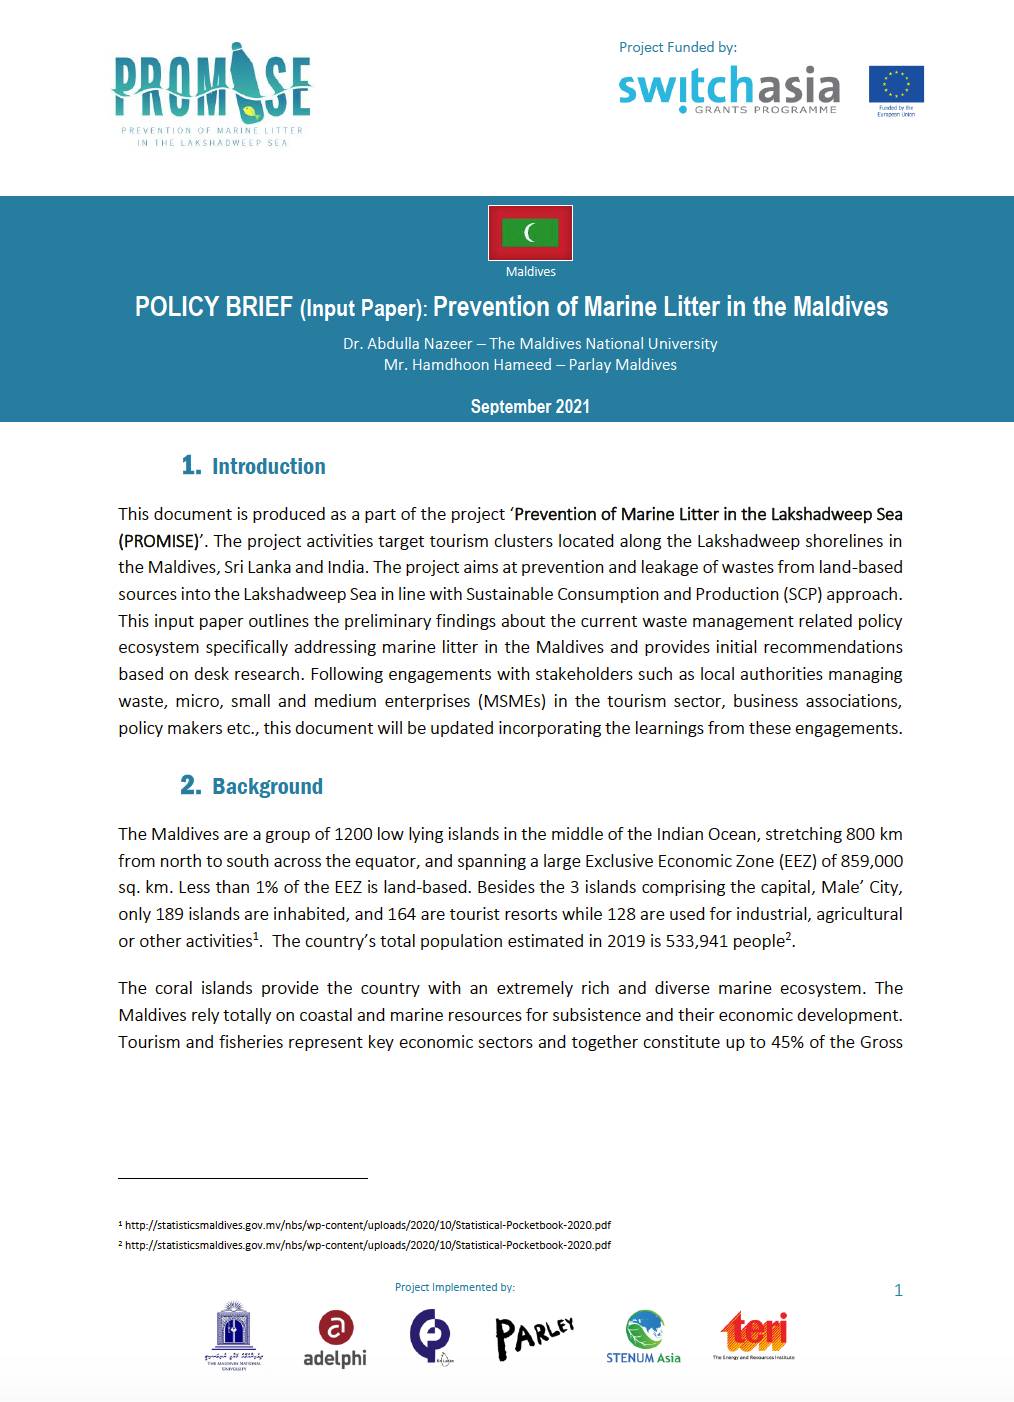 POLICY BRIEF: Prevention of Marine Litter in the Maldives